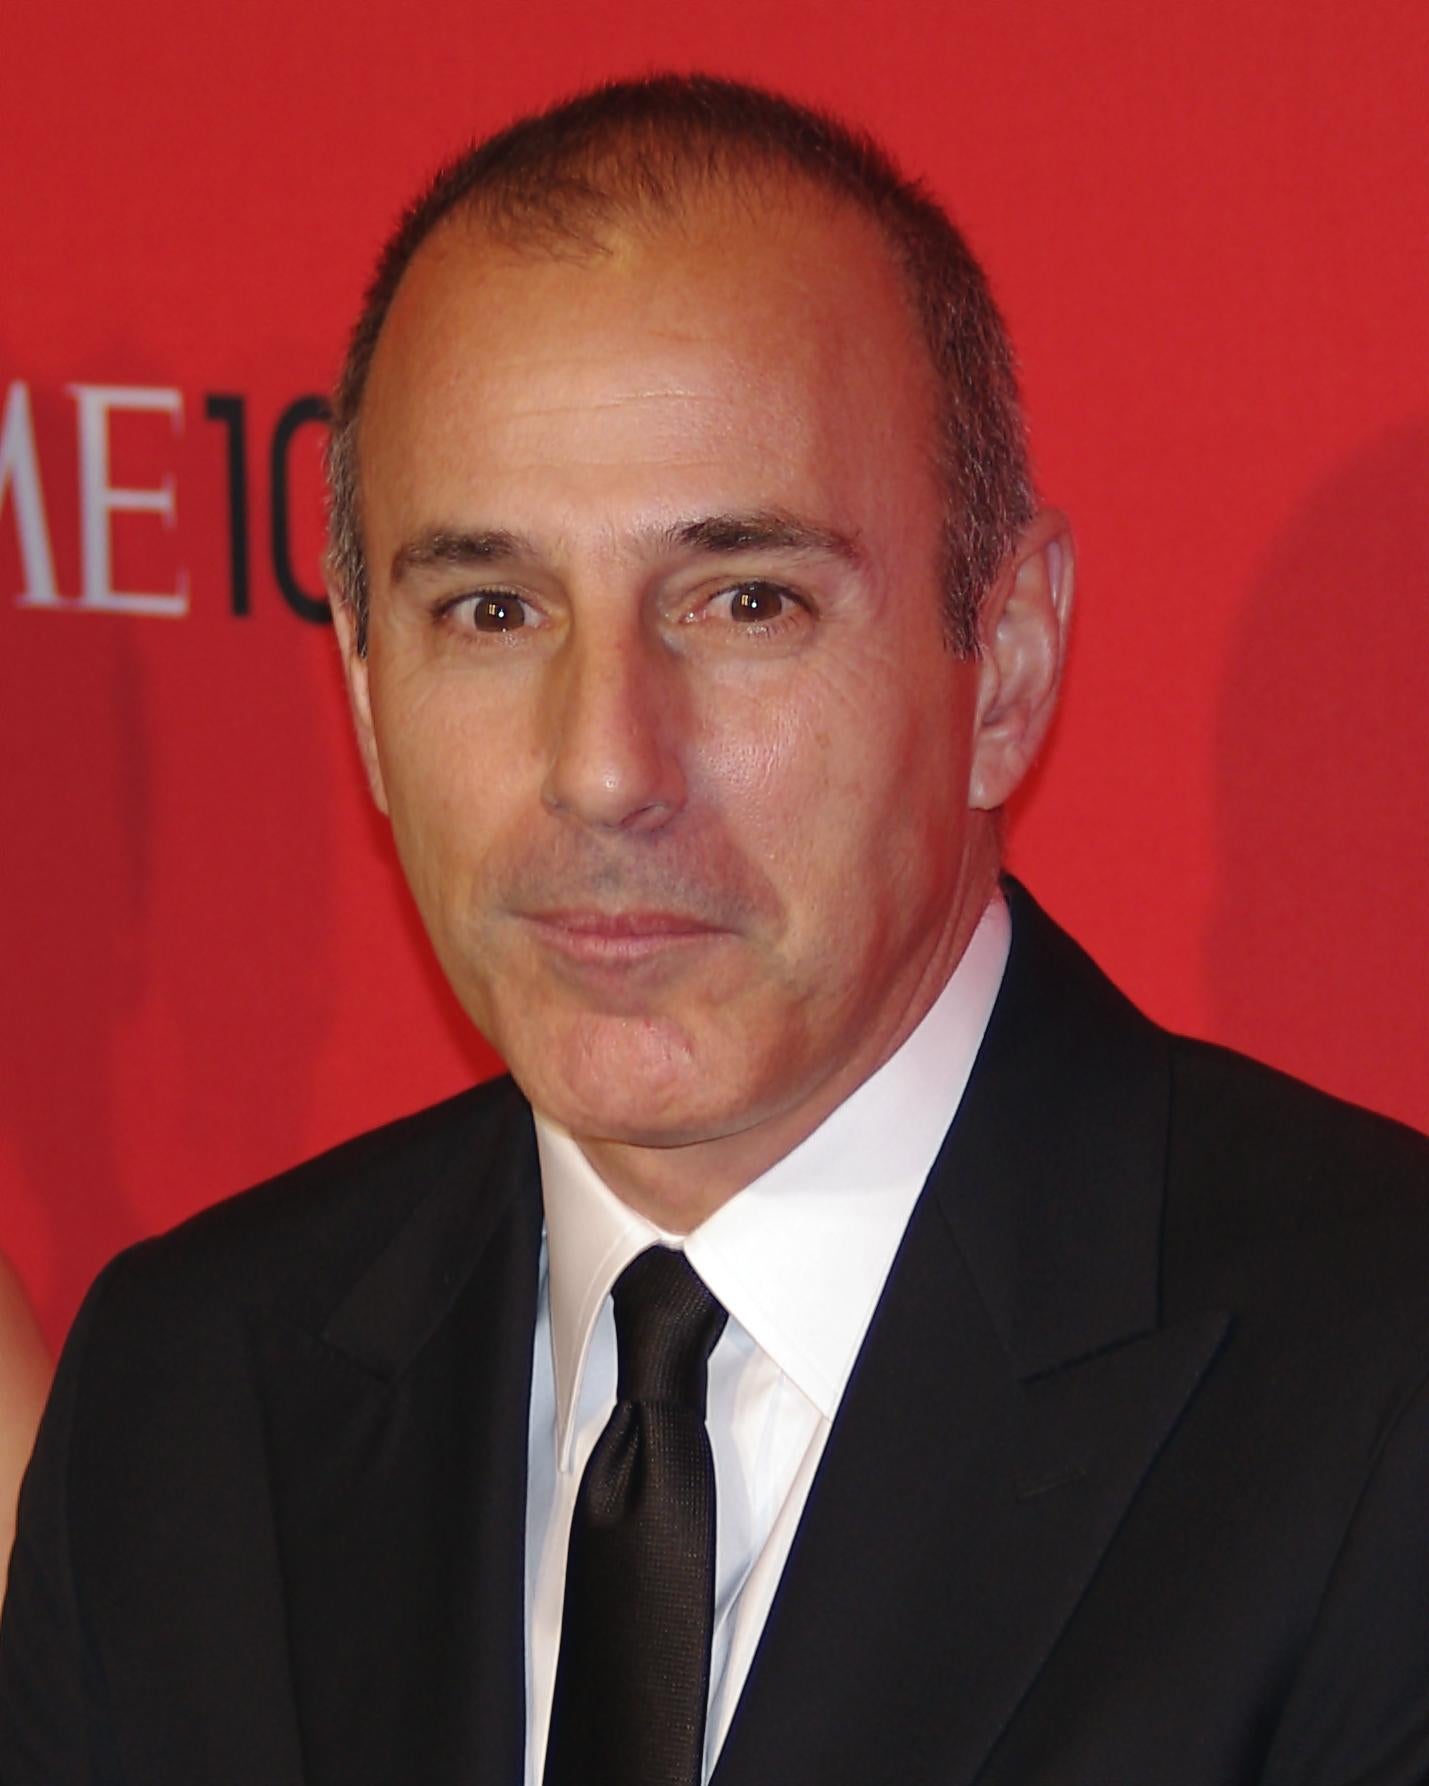 Matt Lauer was sacked by NBC in November after being confronted by allegations of sexual misconduct